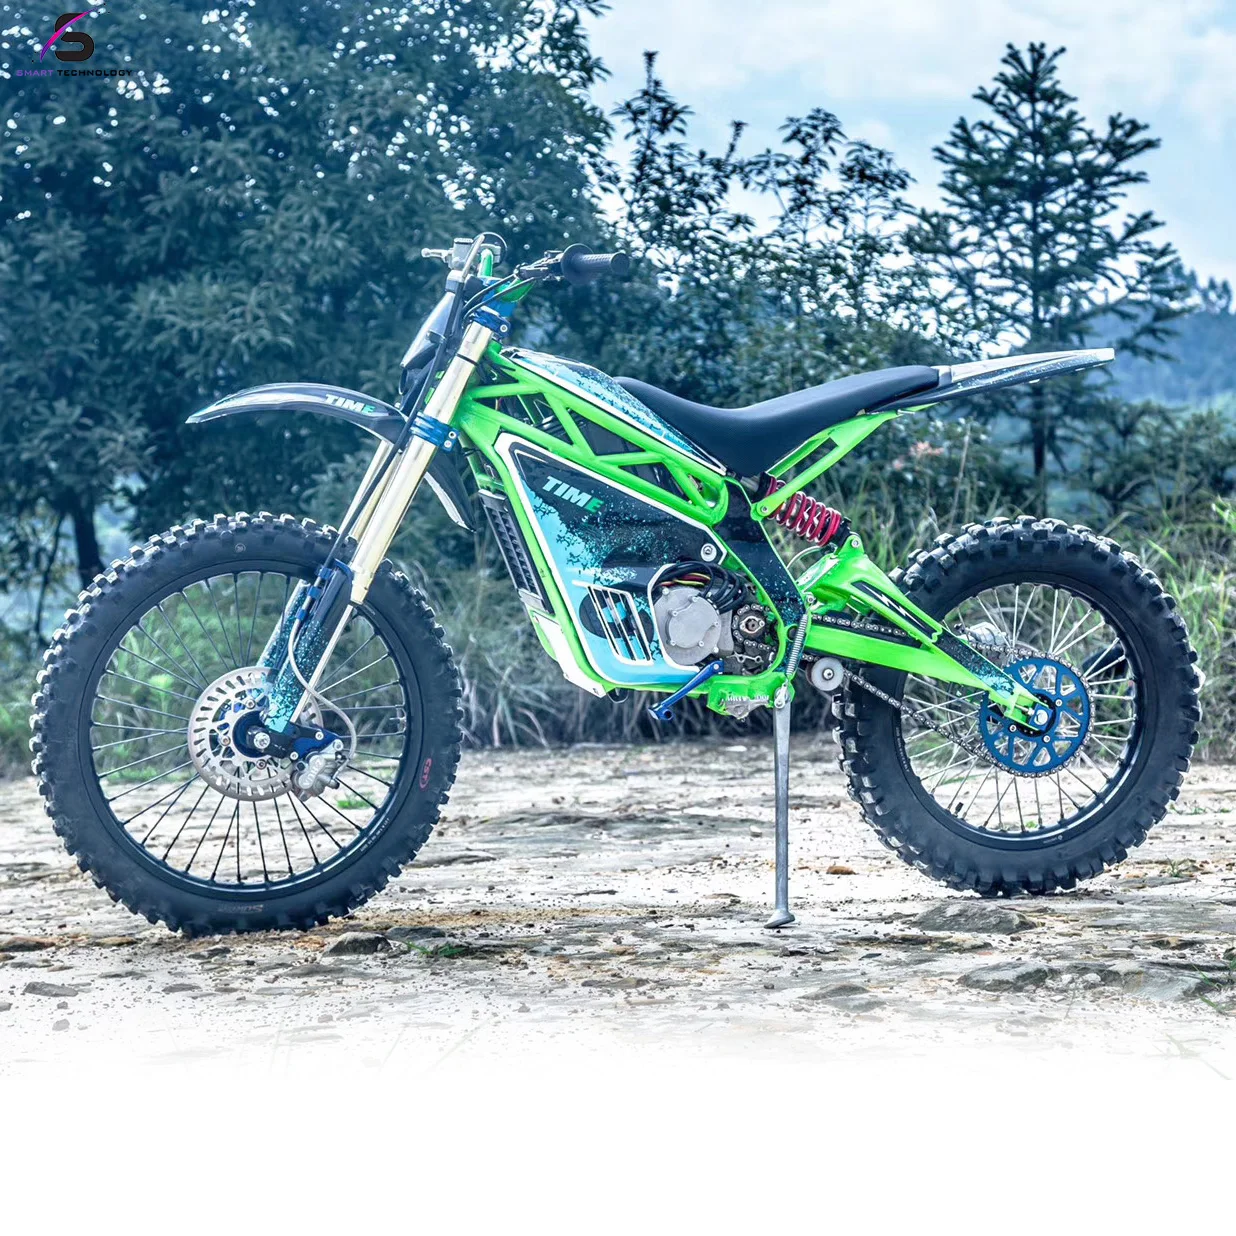 

Black Adult Motor cross Enduro Ebike 12000W 26inch Tire E Dirt Bike Motorbike Scooter Electric Motorcycle Used for Sale